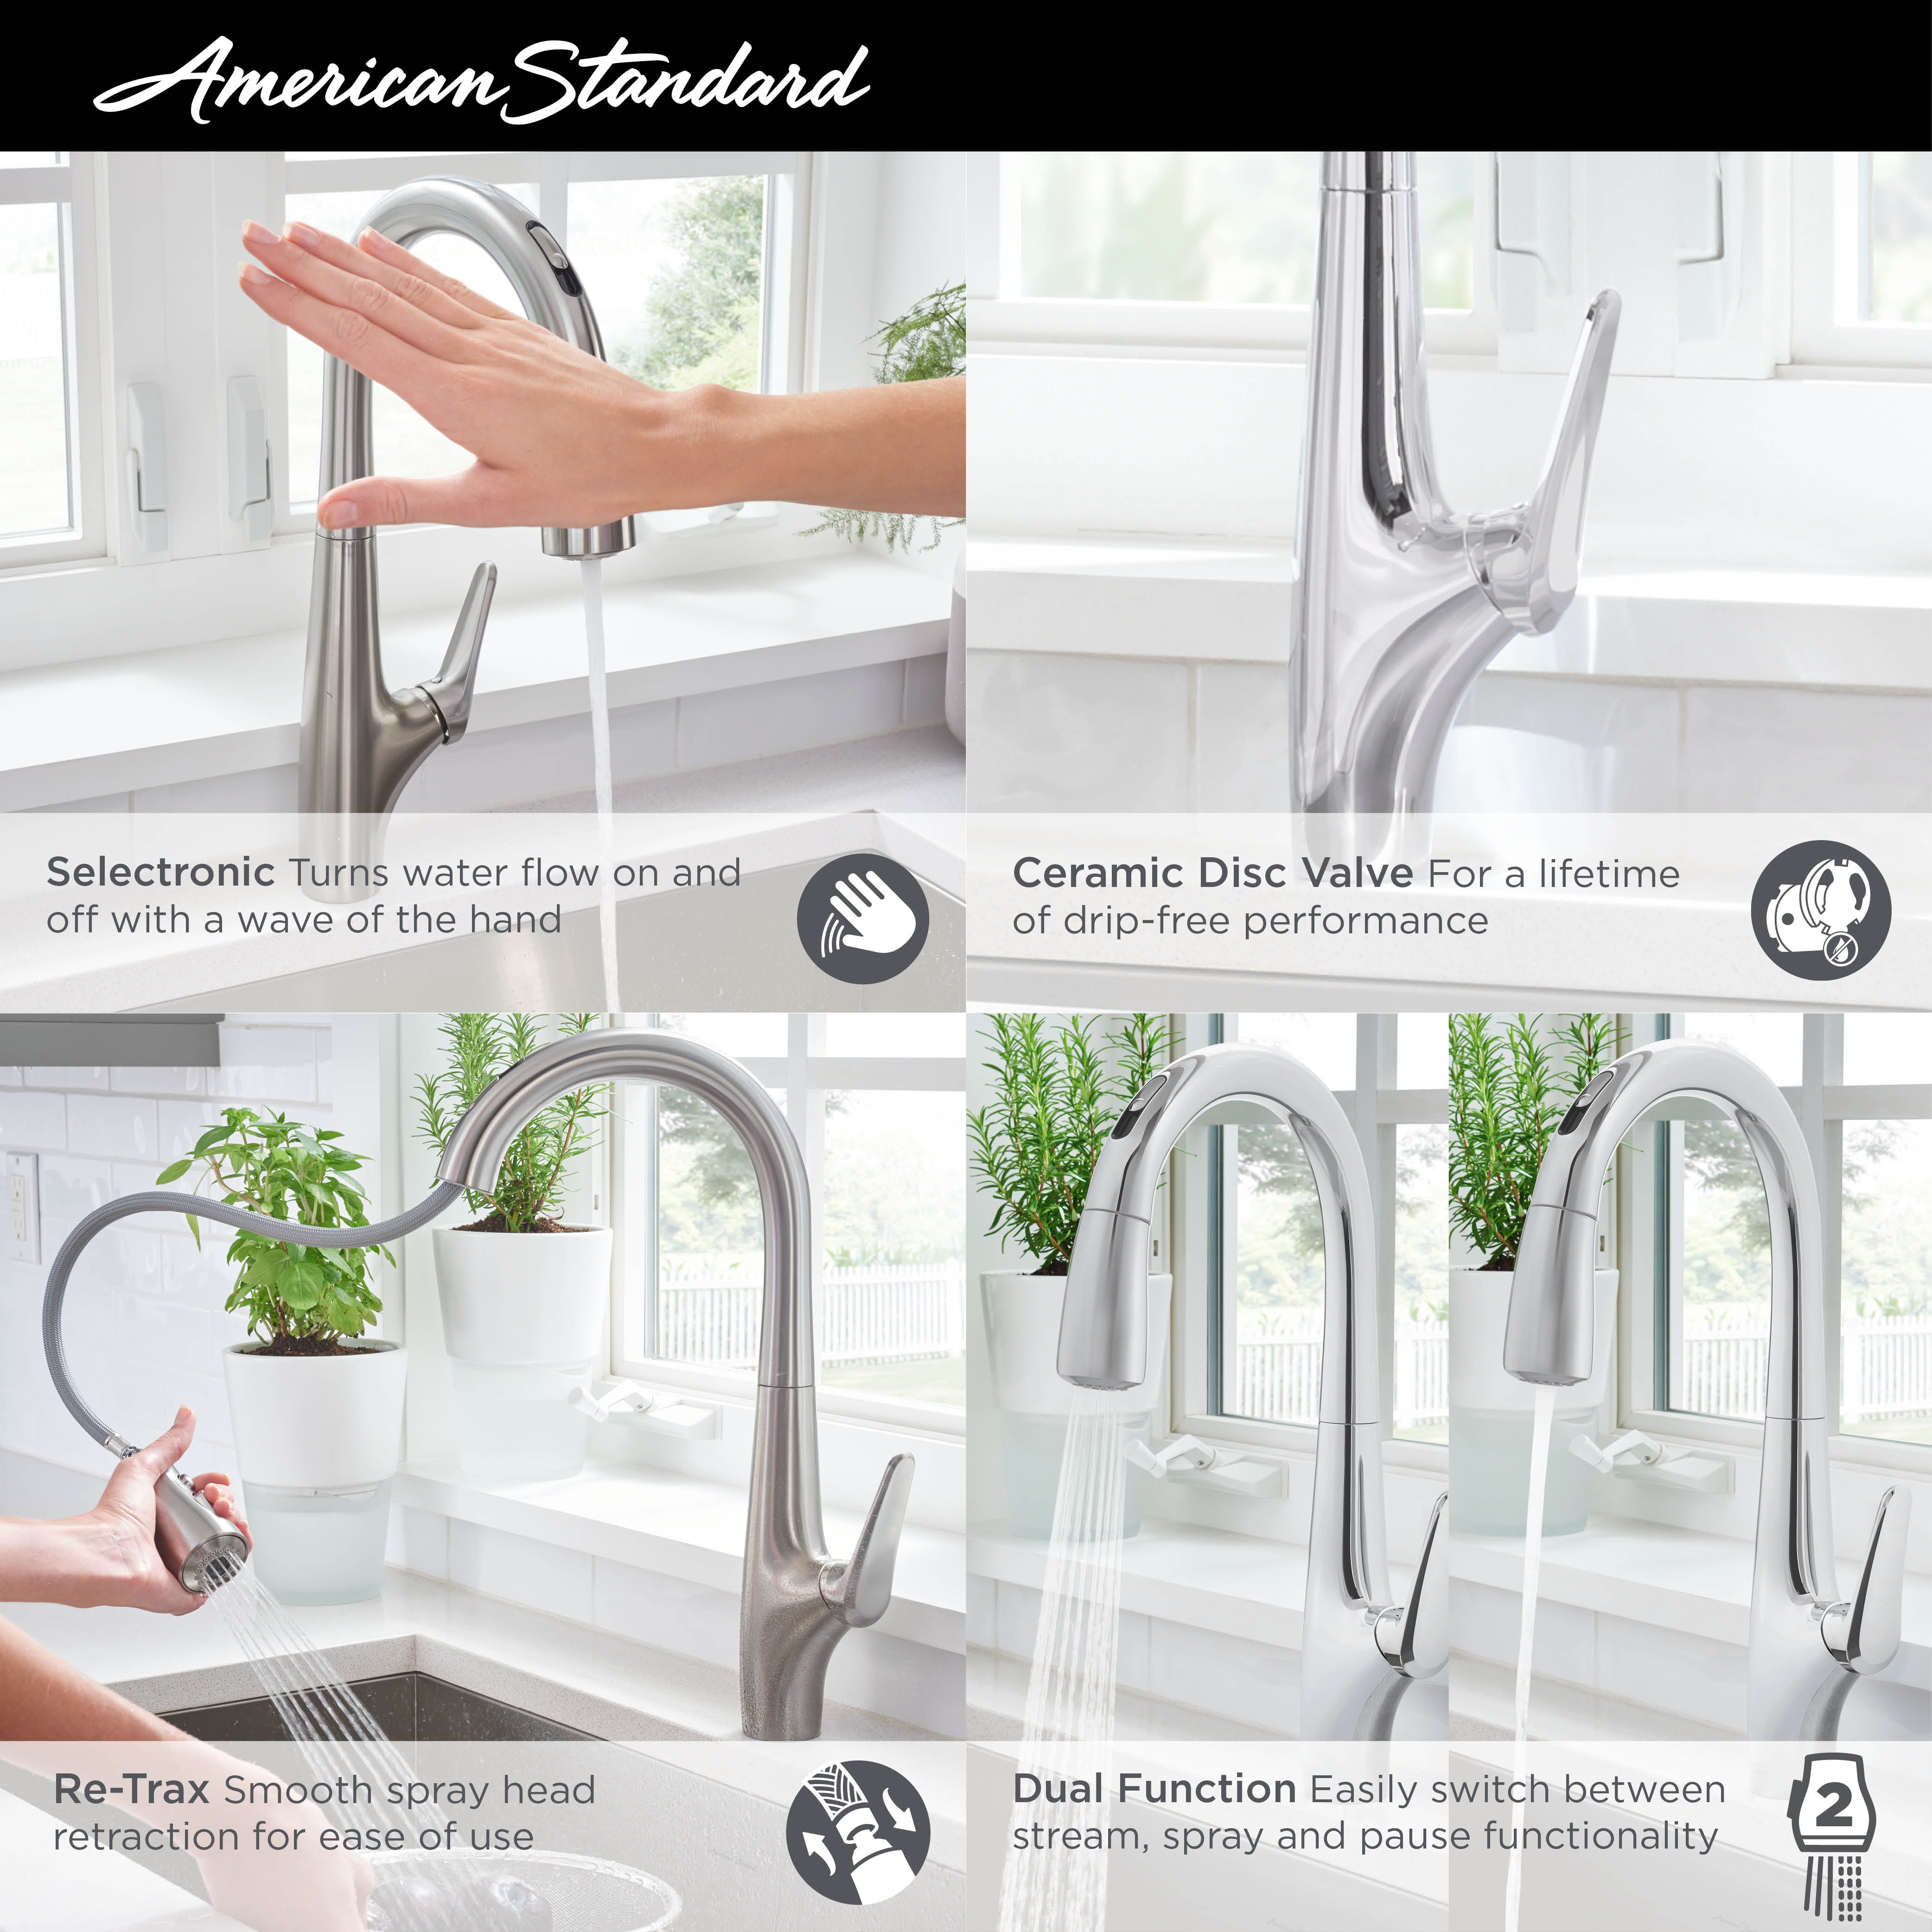 Avery Touchless Single Handle Pull Down Dual Spray Kitchen Faucet 15 gpm 57 L min STAINLESS STL